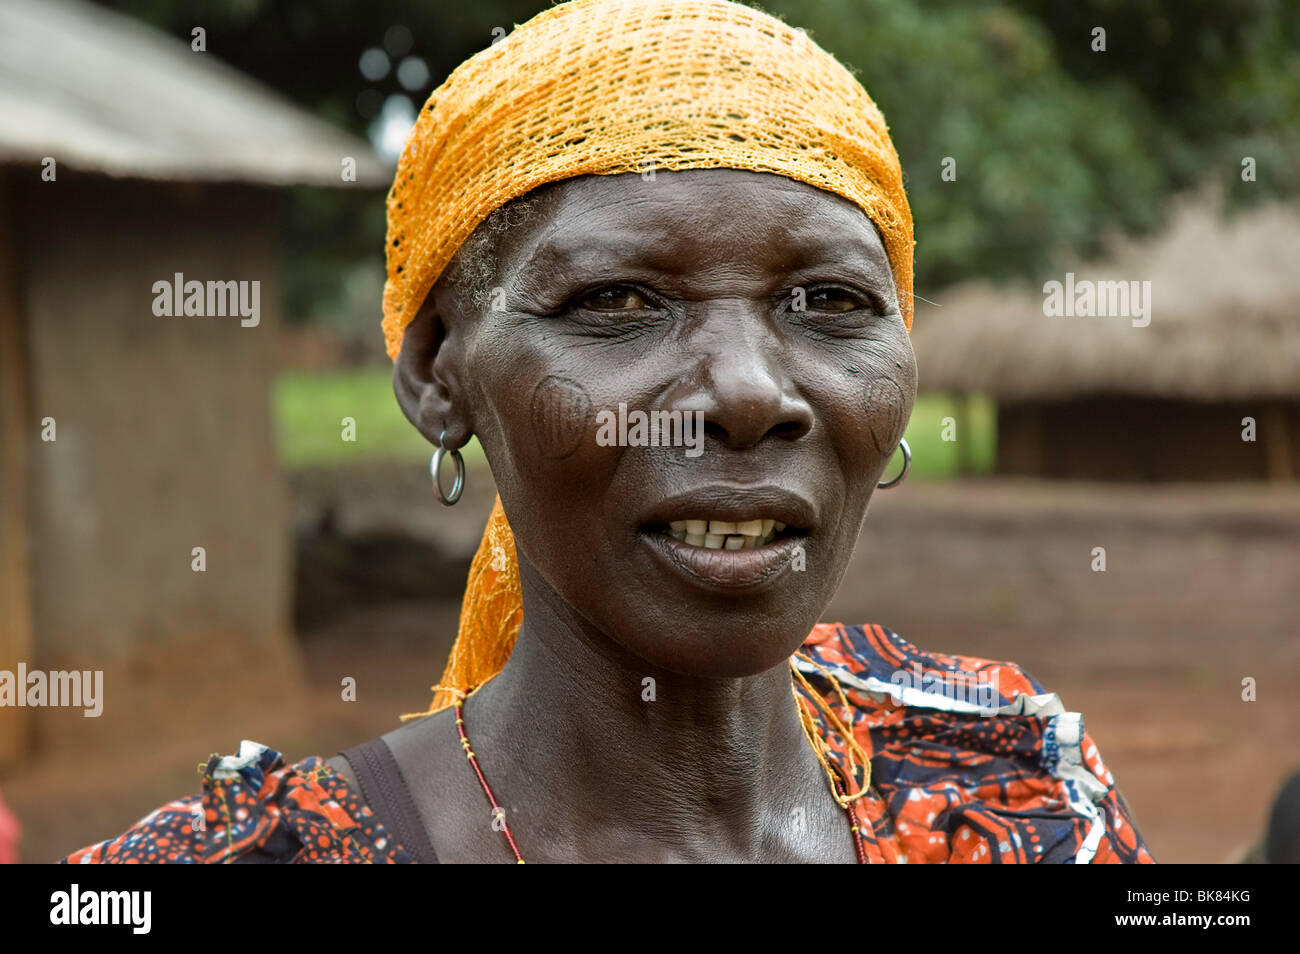 Congolese woman with face tribal scars Stock Photo